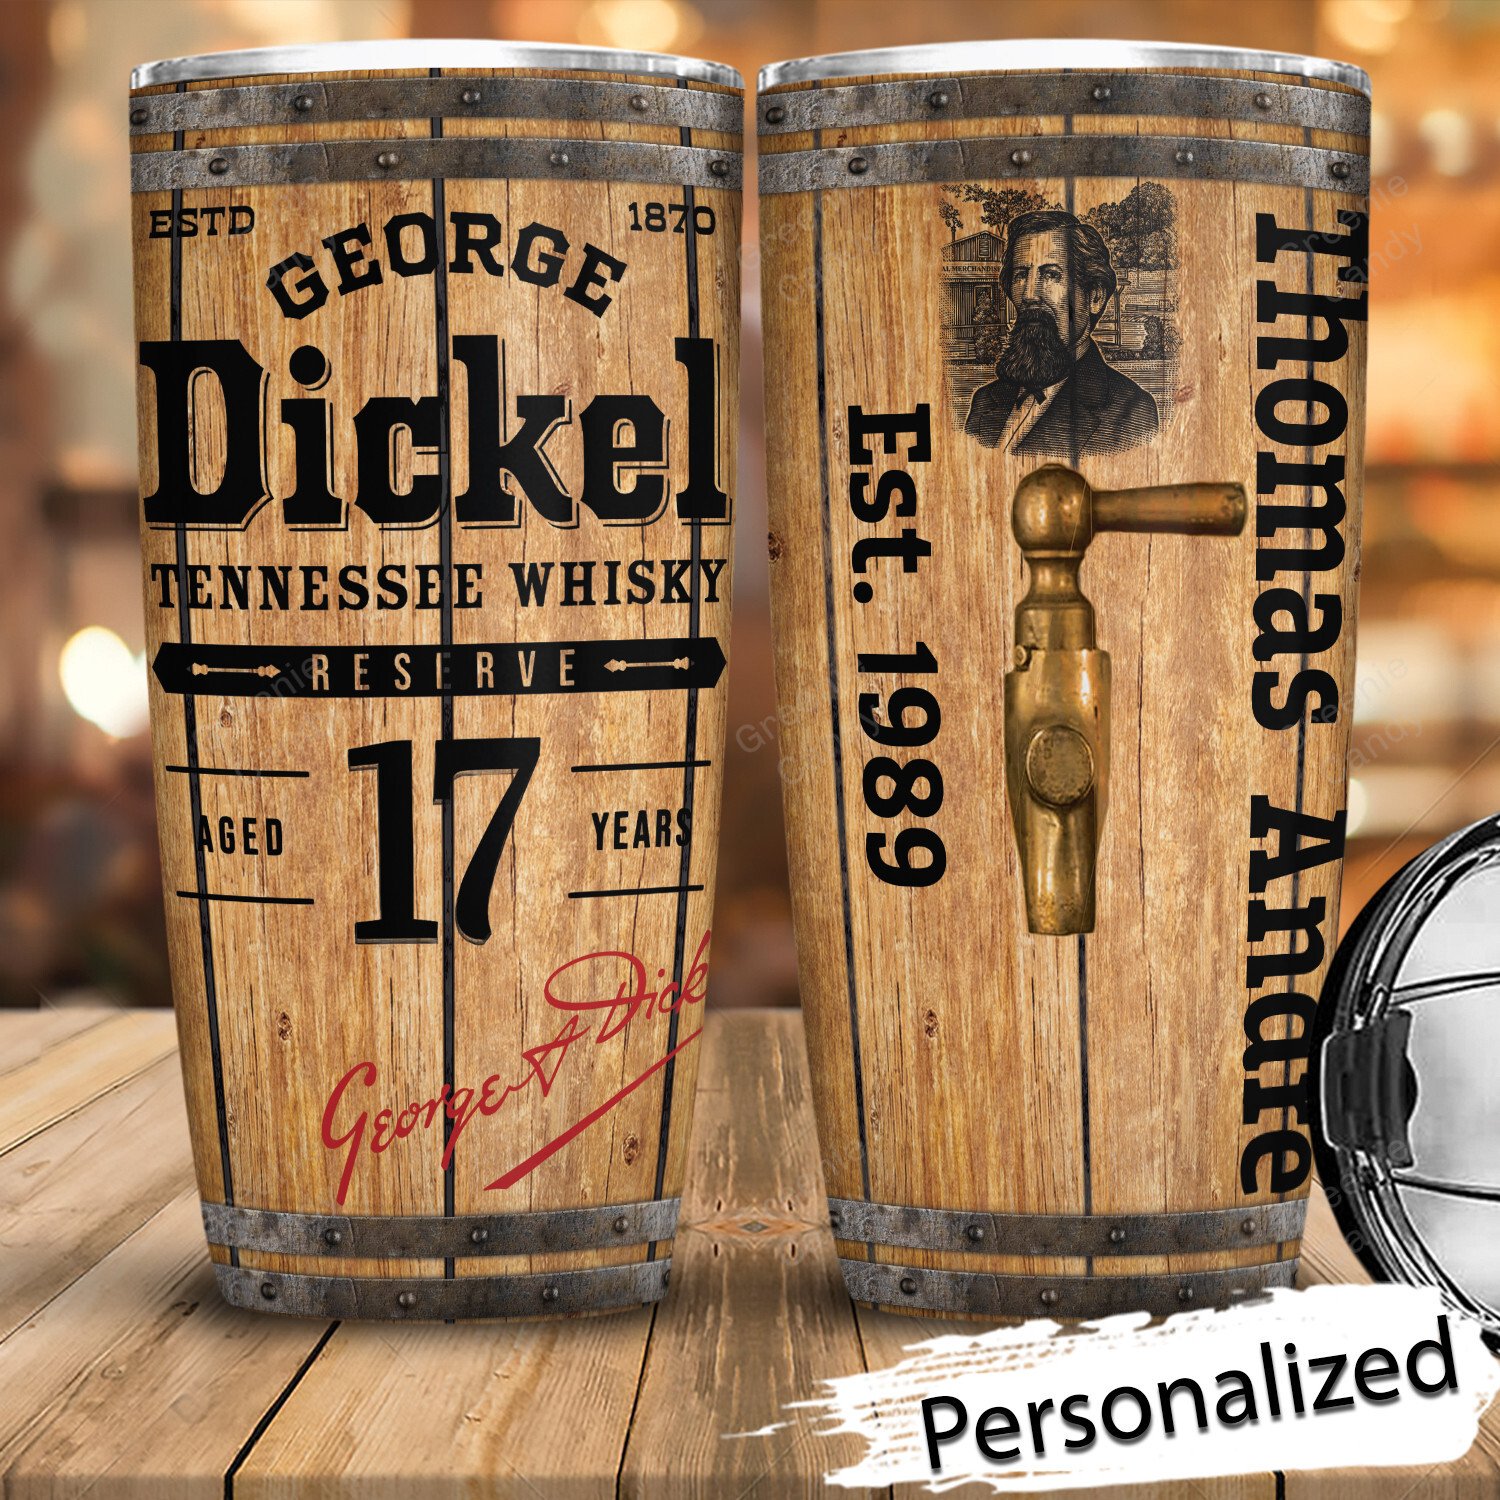 Personalized_George_Dickel_Tennessee_Whiskey_Tumbler_1